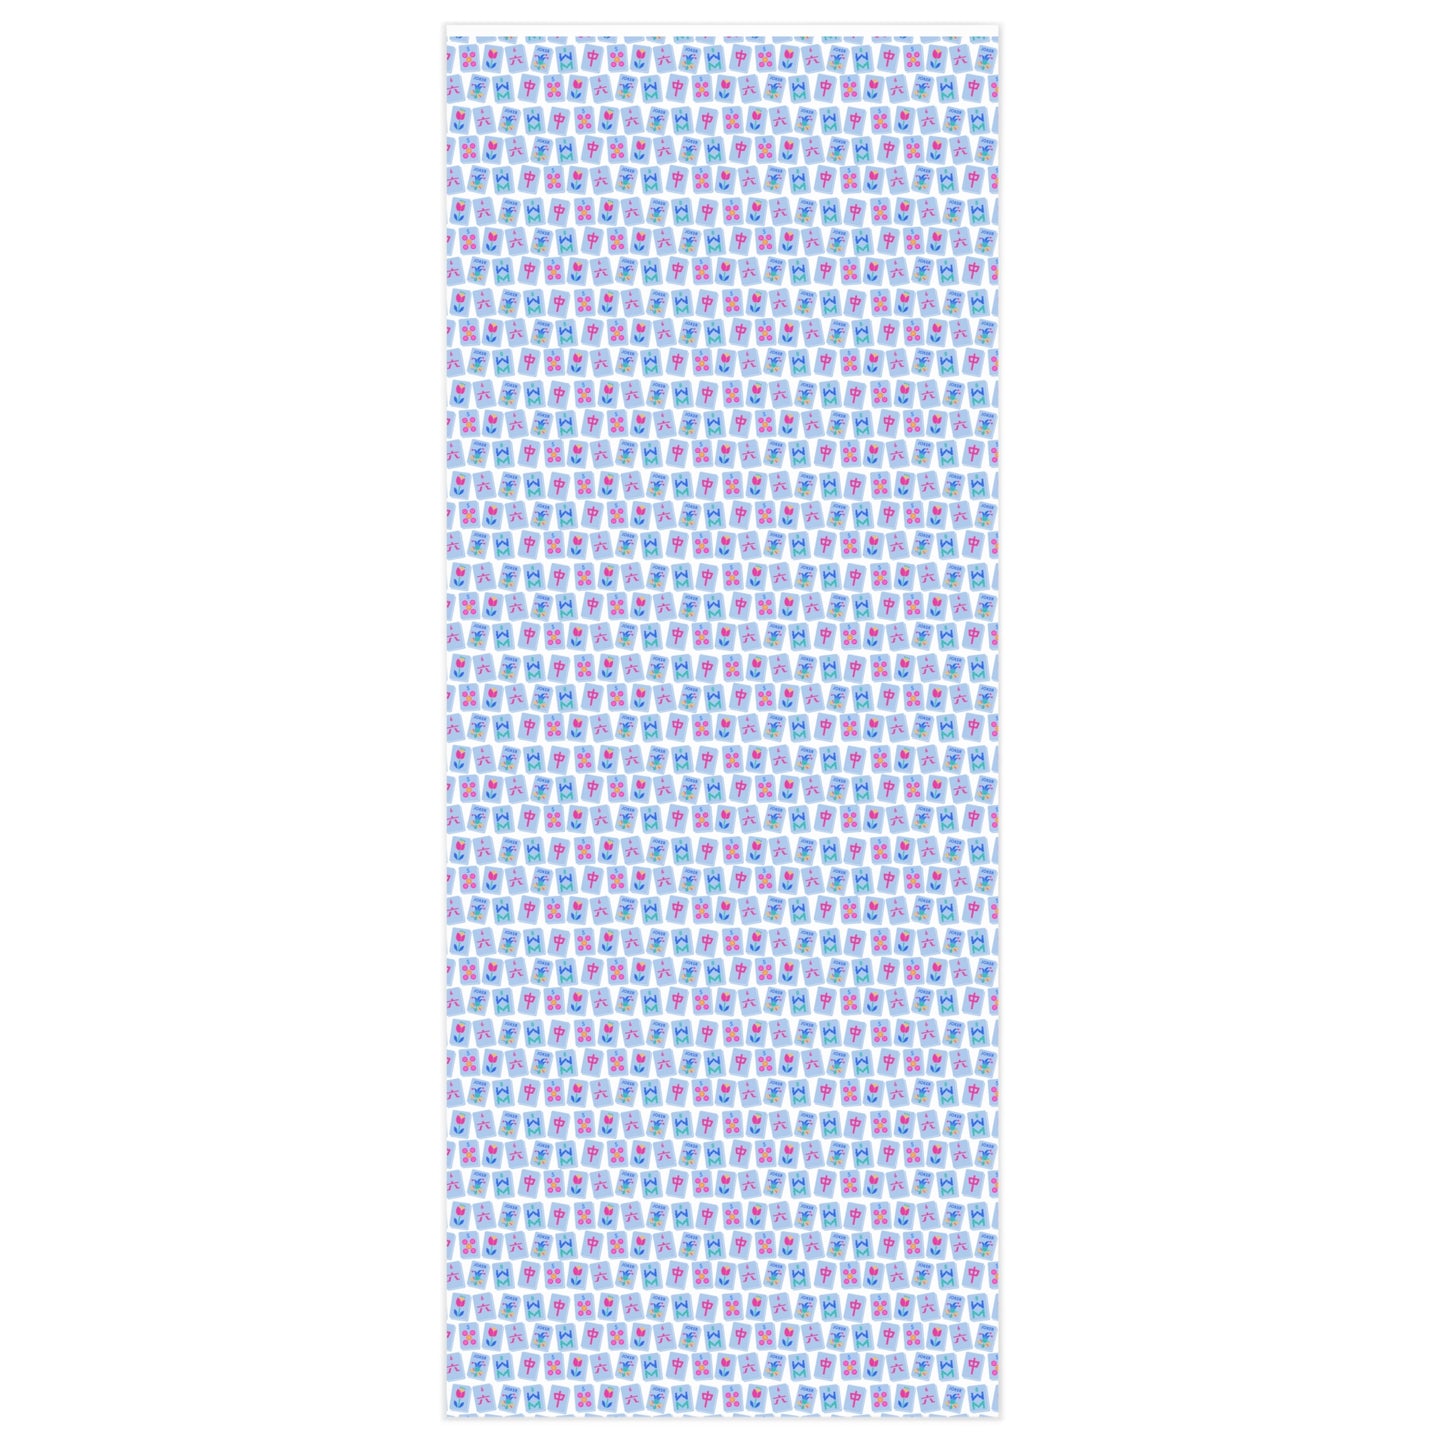 Mahjong Wrapping Paper (24" x 60") | Mahjongg Holiday Wrapping Paper | Colorful Mah Jongg Tile Design Make the Perfect Gift or Party Addition.